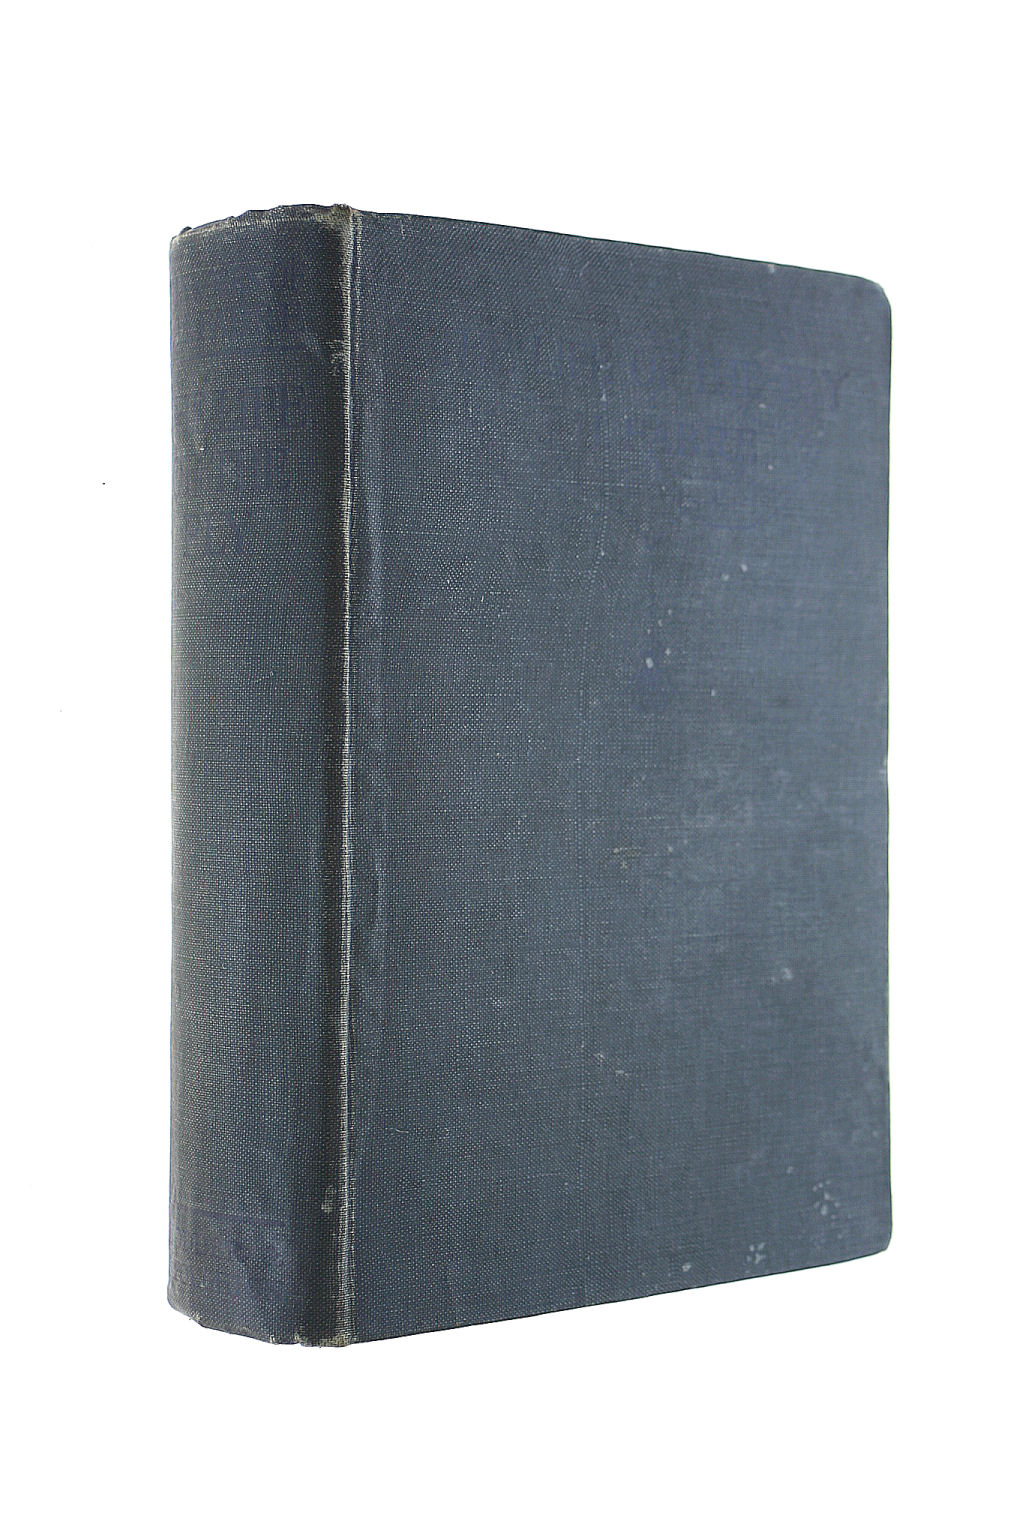 FABRE, J.HENRI - The Life of the Fly; With Which Are Interspersed Some Chapters of Autobiography